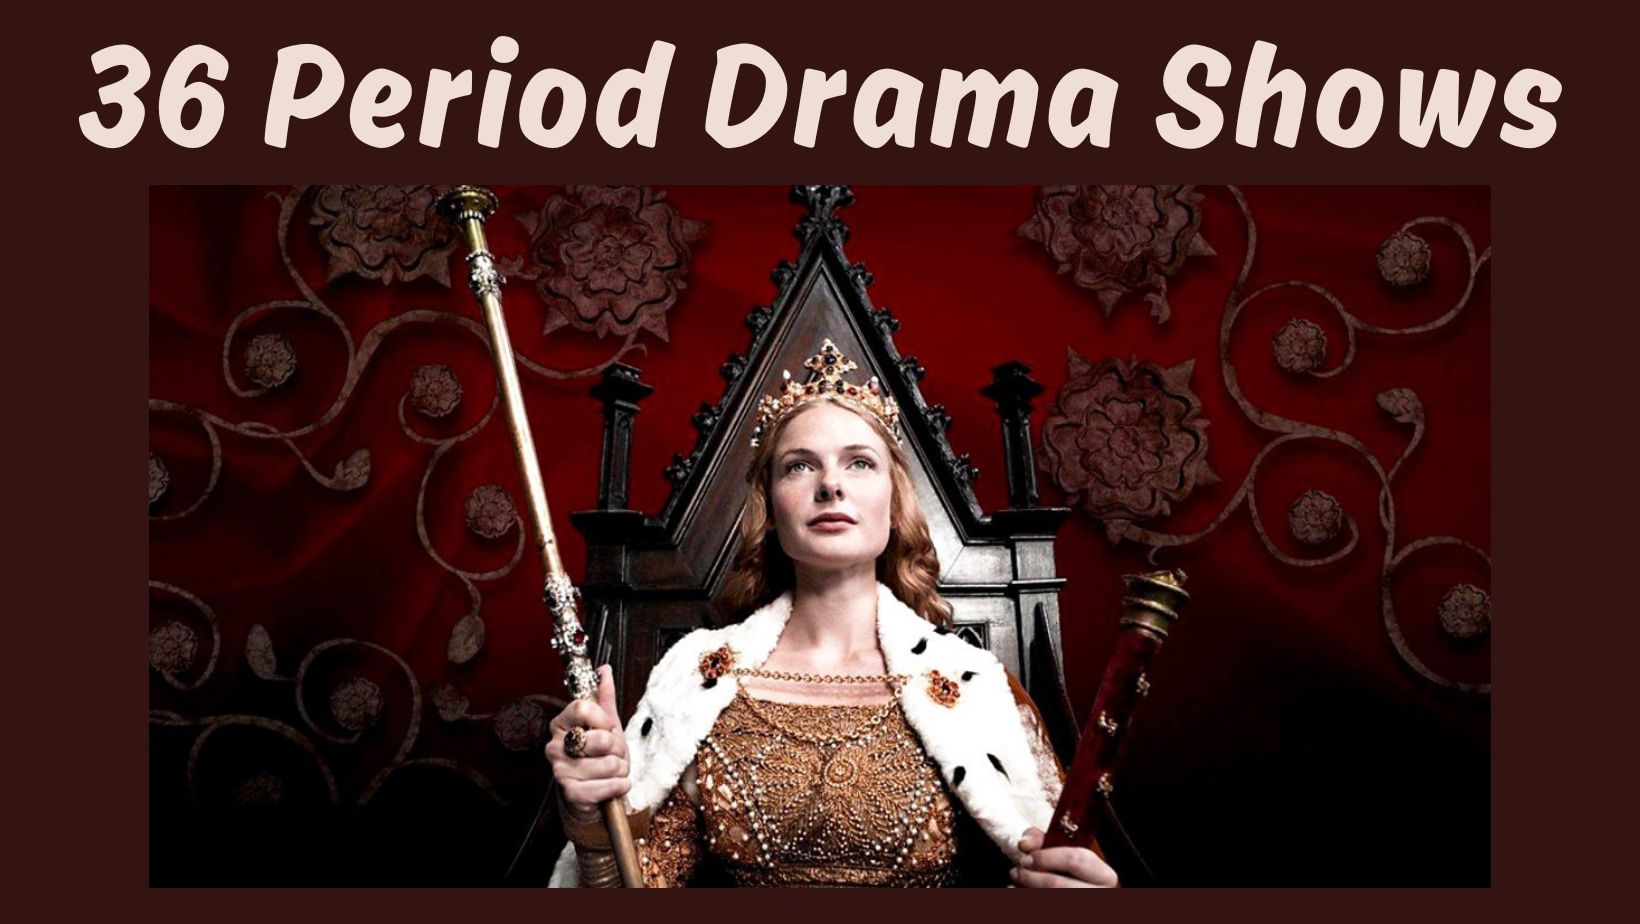 image from the show "the white queen". text "36 period drama shows"